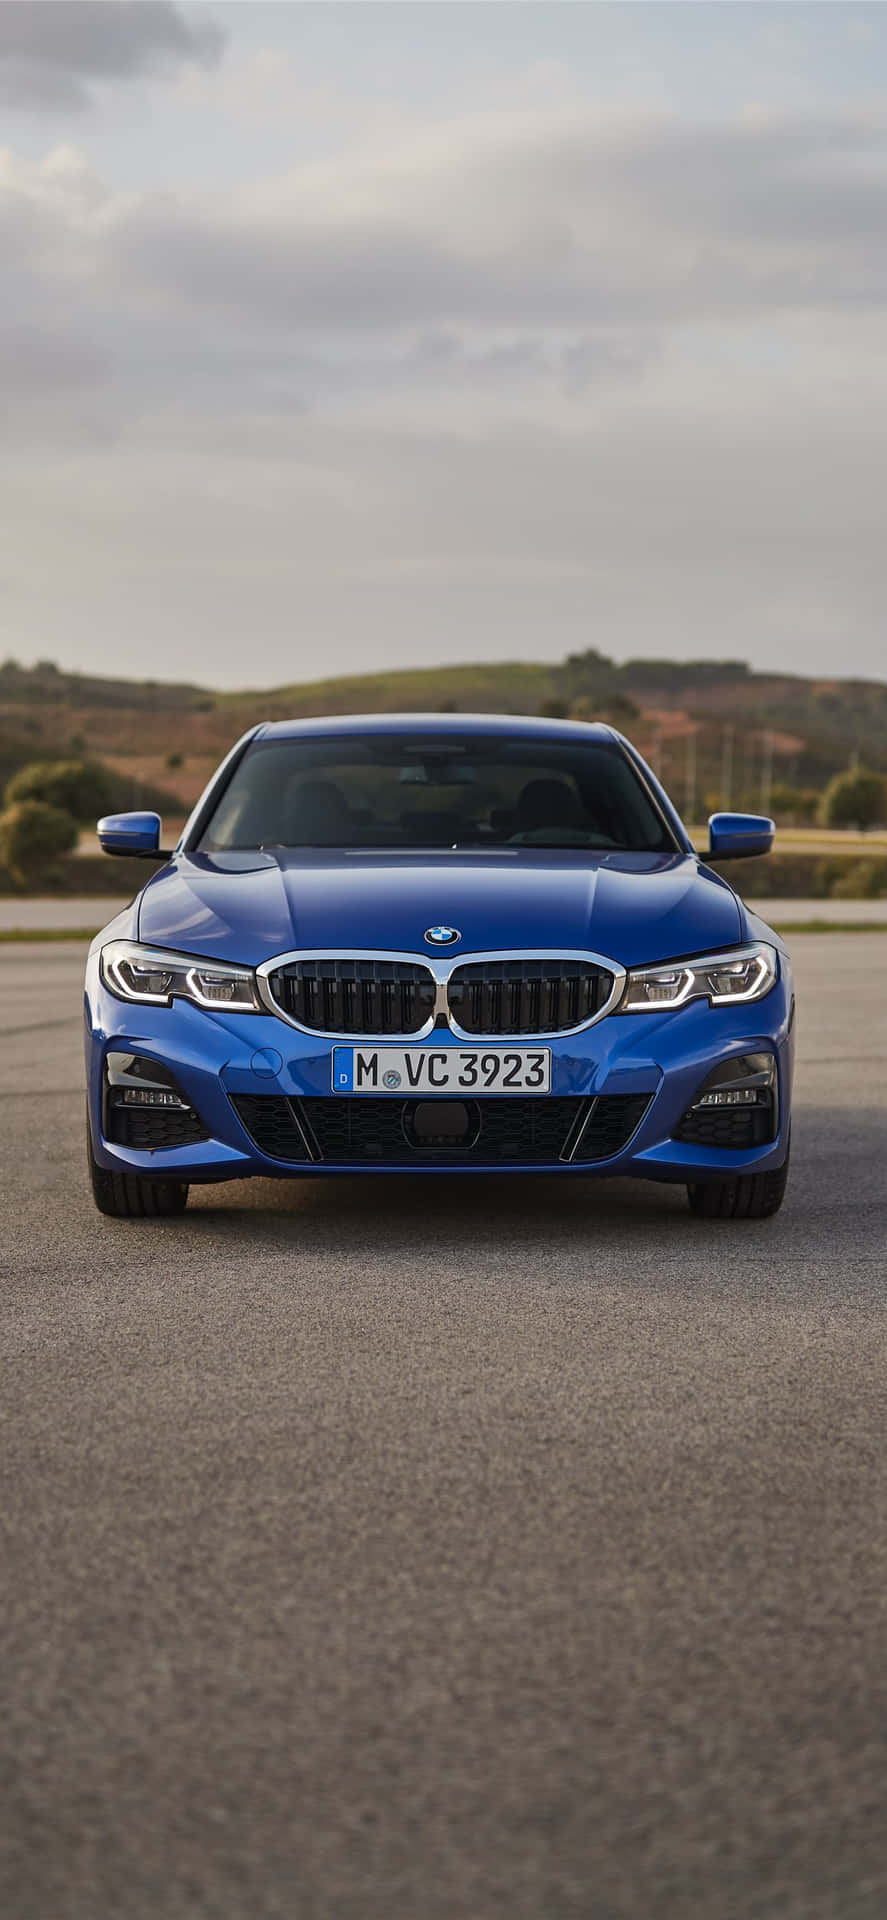 The Blue Bmw 4 Series Sedan Is Driving Down The Road Wallpaper